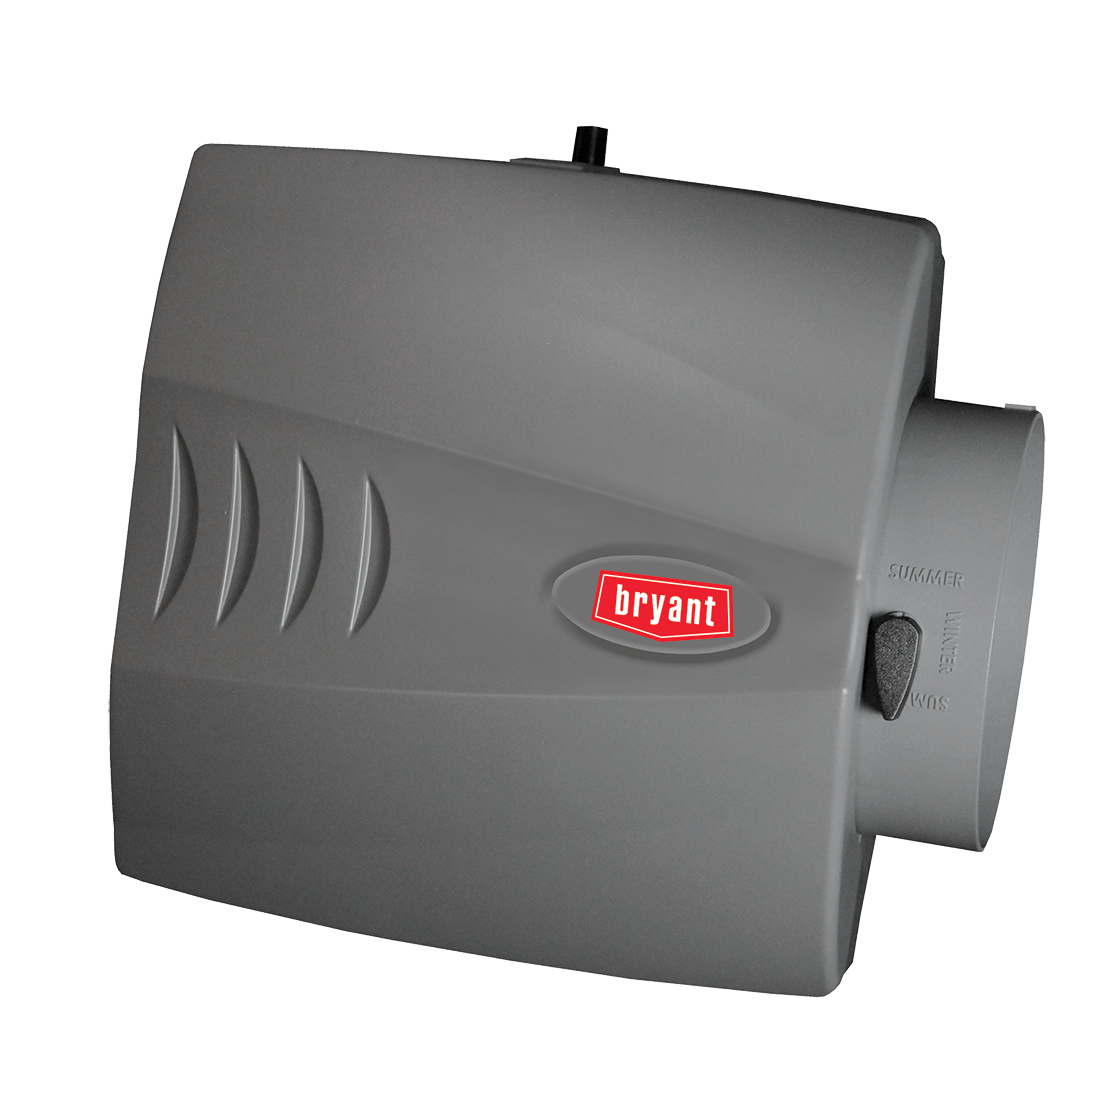 Preferred™ Series Large Bypass Humidifier HUMBBLBP — Hamtramck, MI — A & E Heating & Cooling